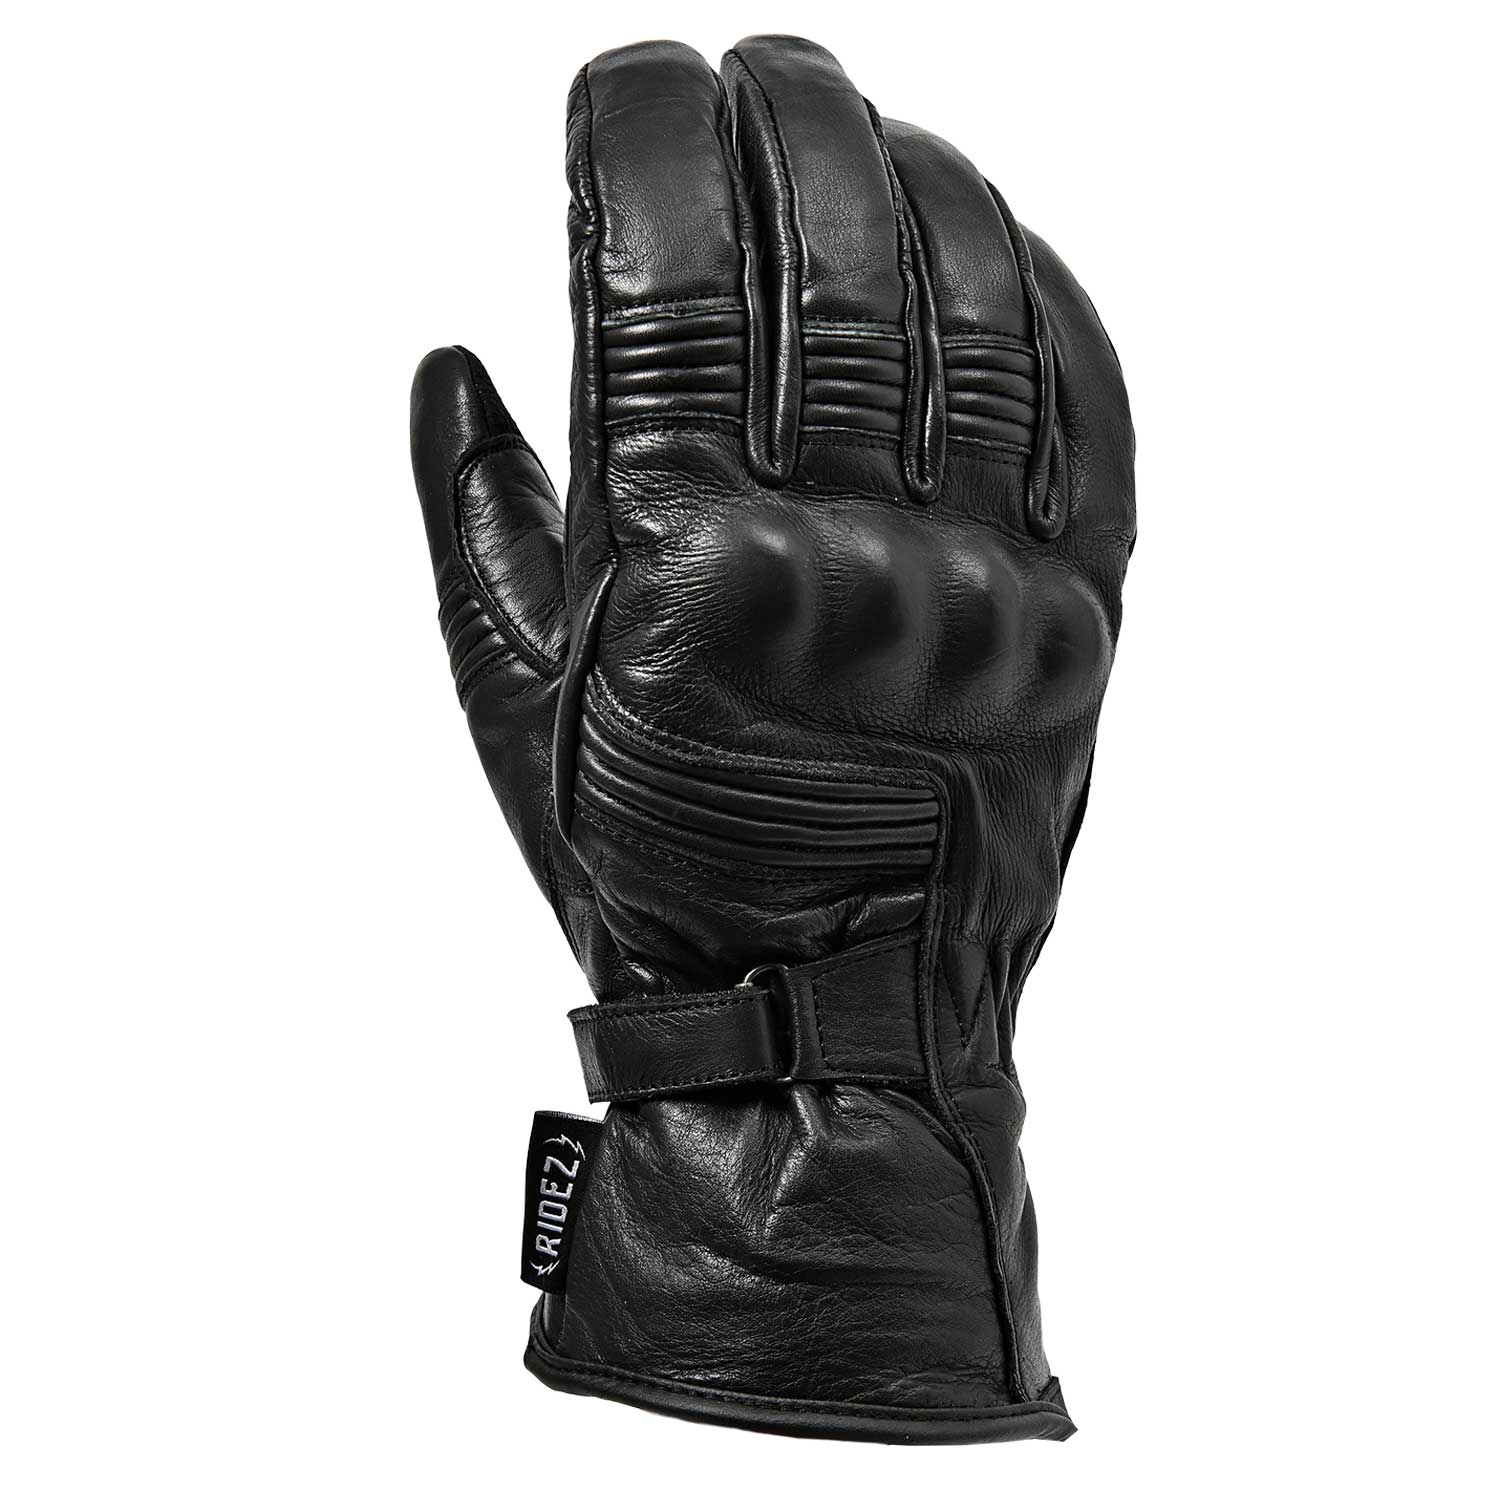 RIDEZ HECTOR GLOVES Motorcycle Leather Gloves BLACK RWG09